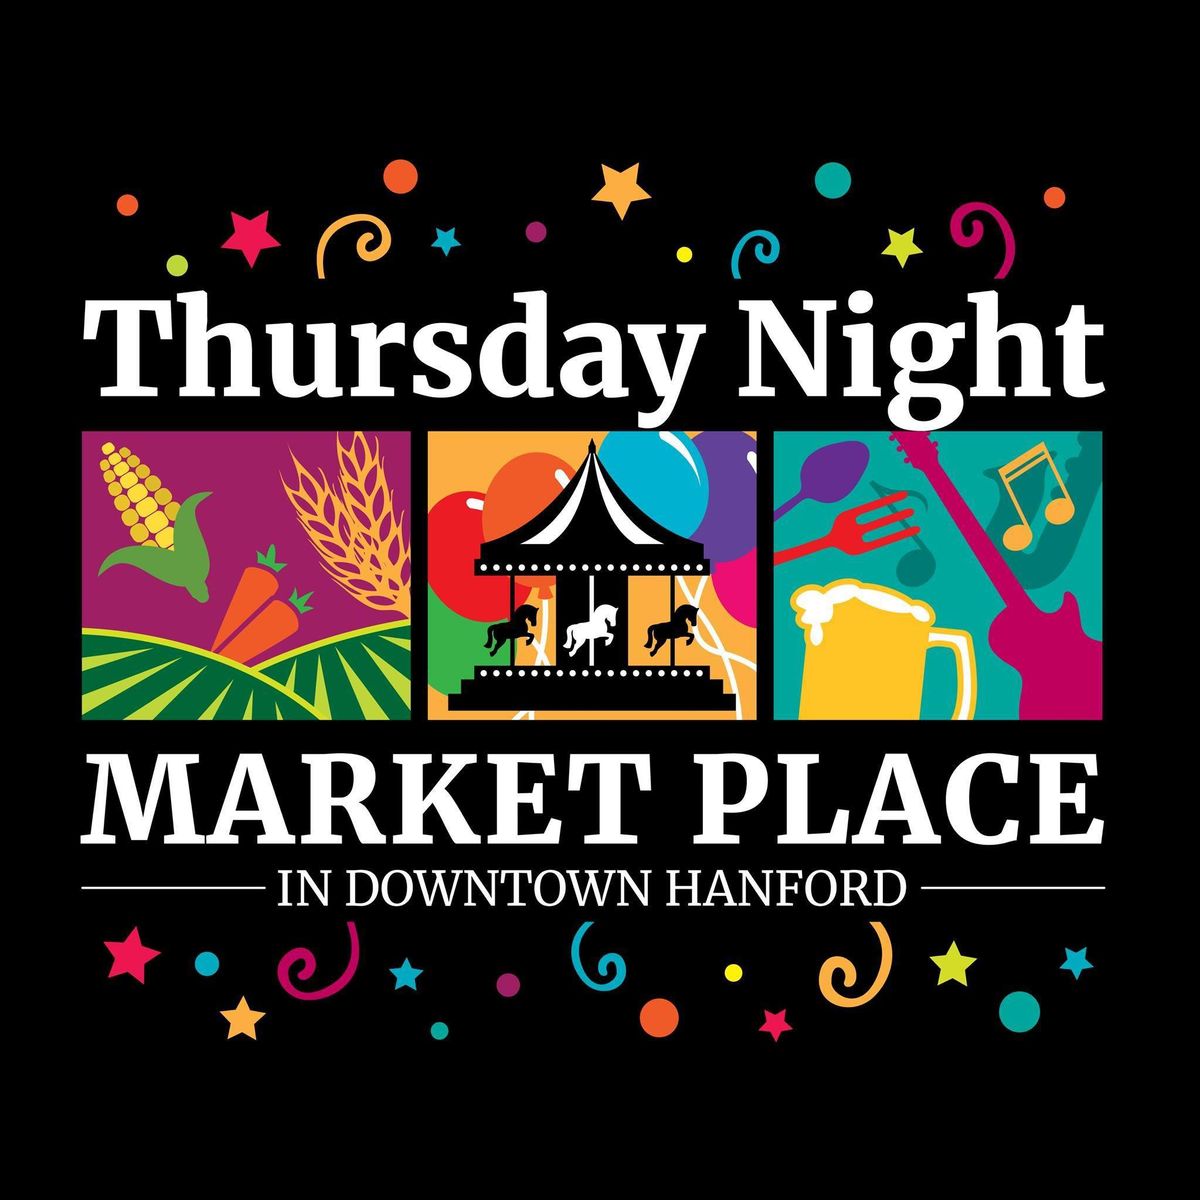 Thursday Night Market Place in Downtown Hanford